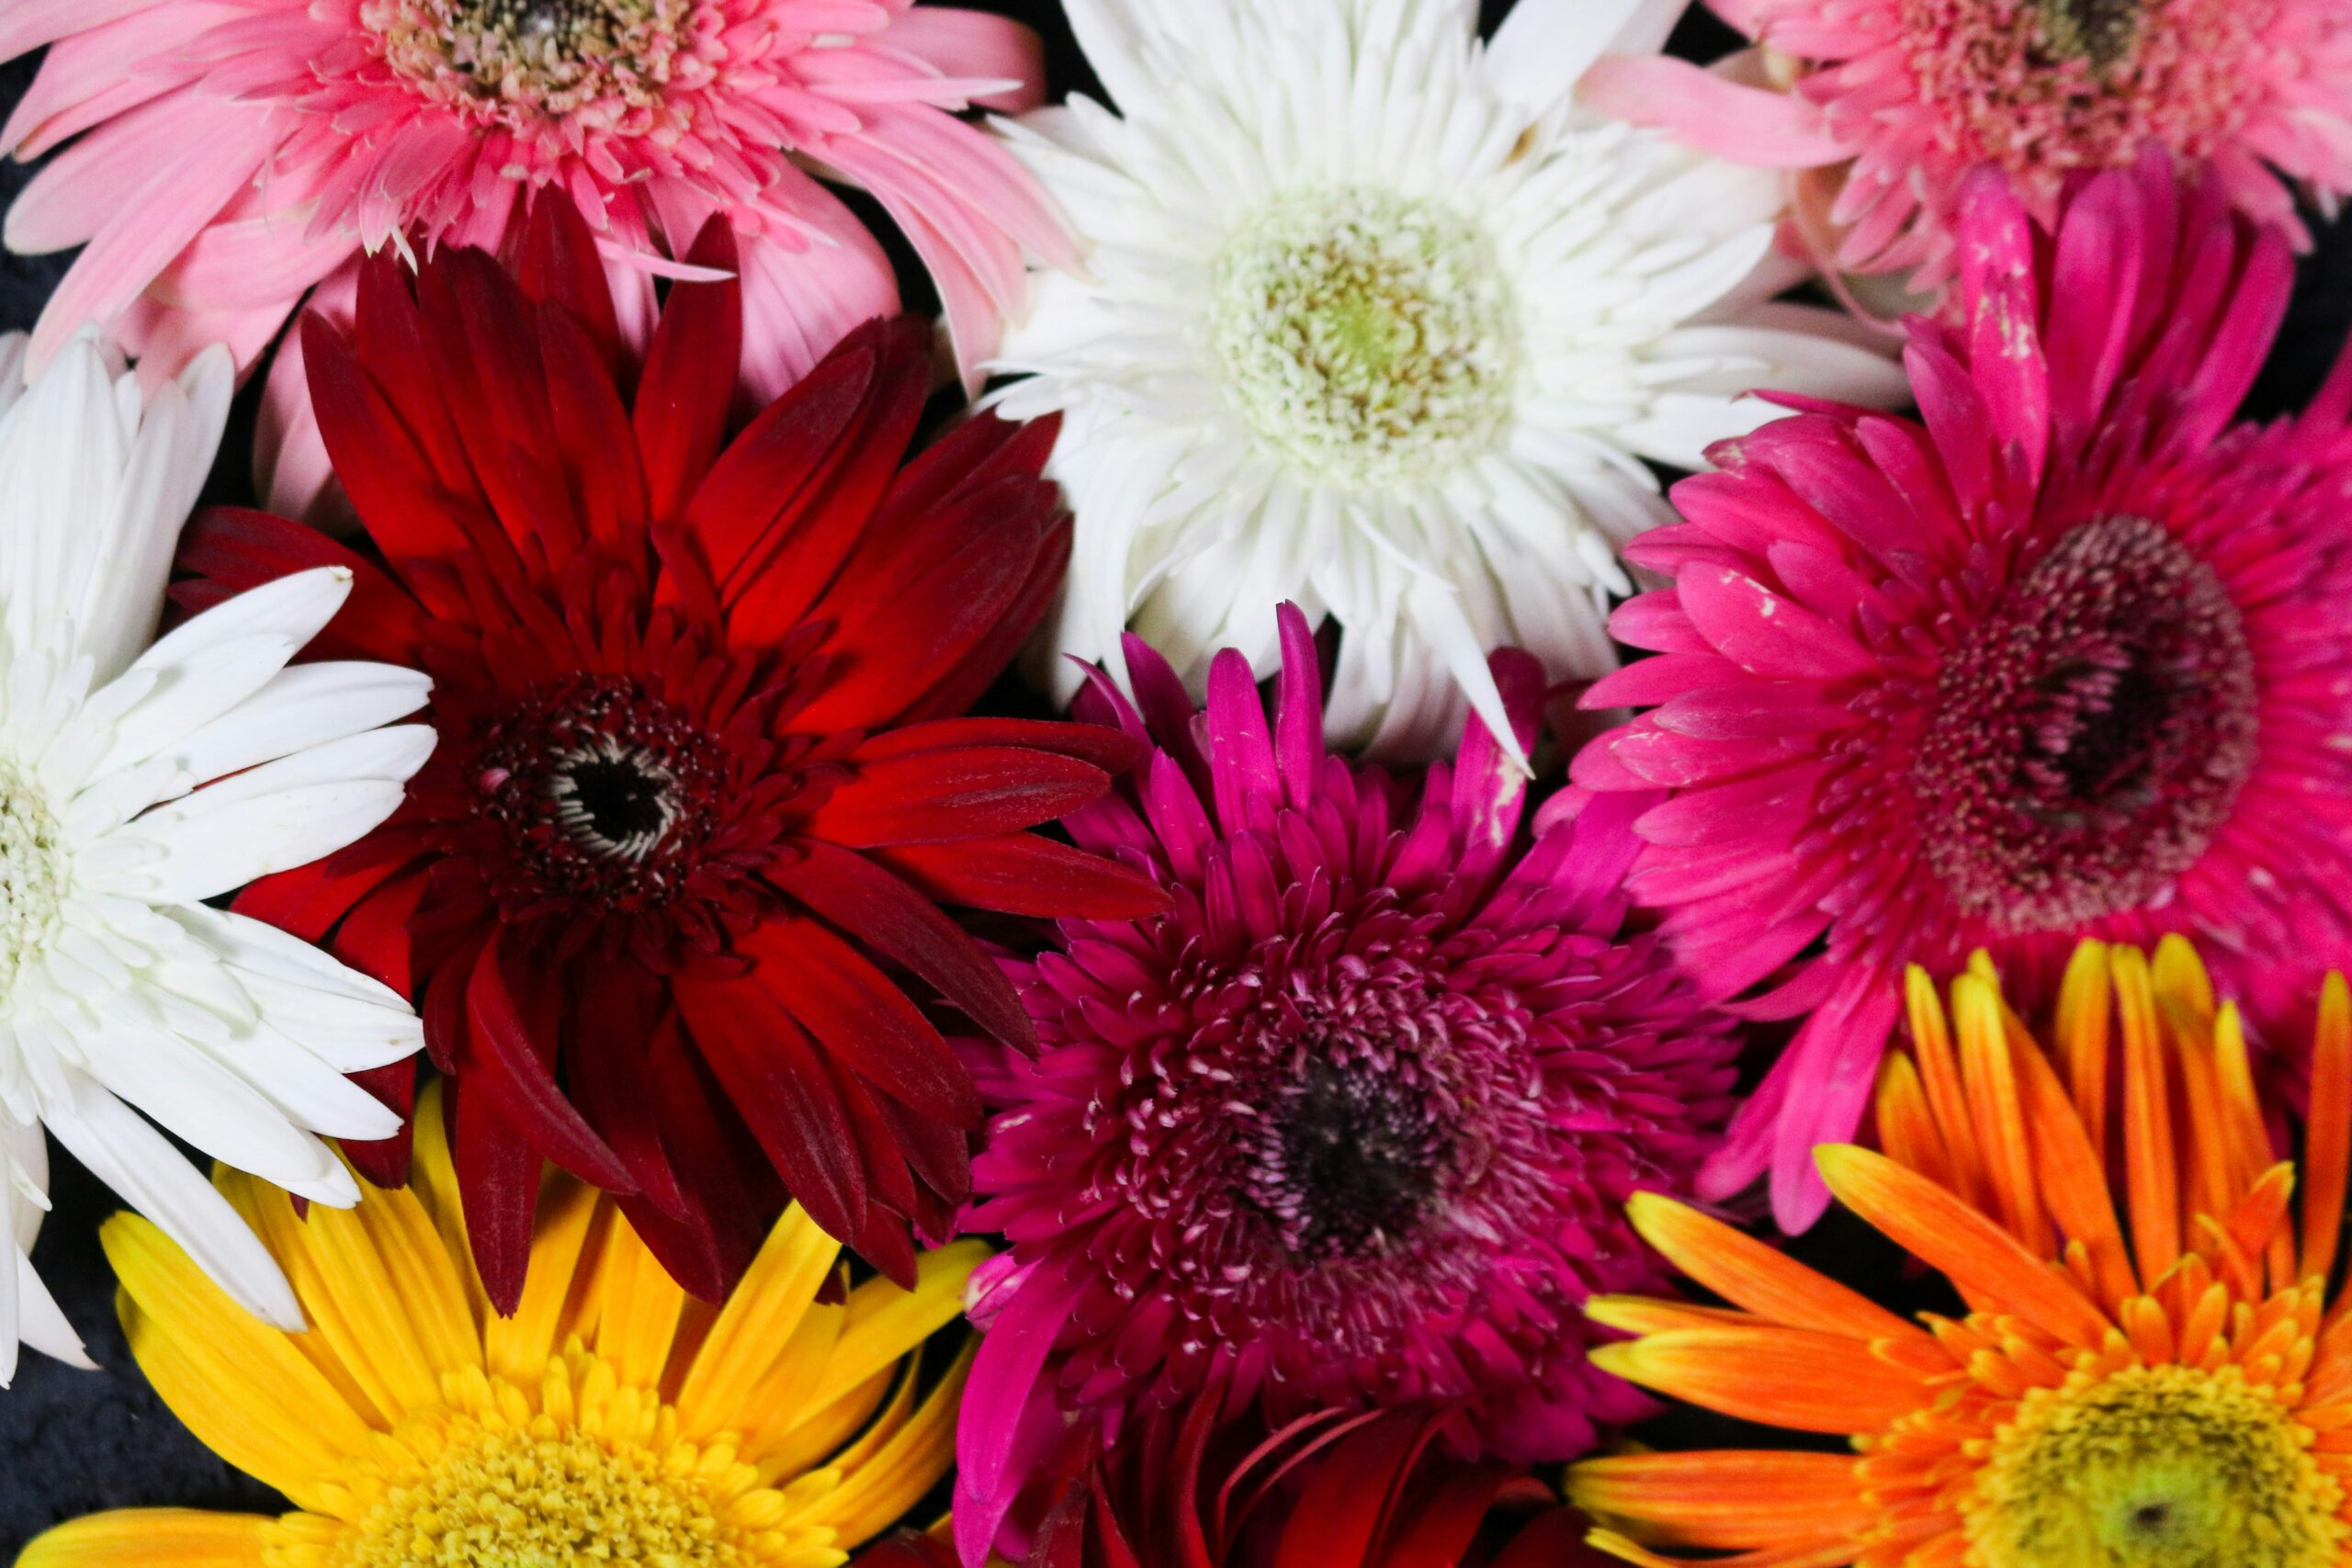 Bunch of brightly coloured flowers: red, pink, yellow and white.